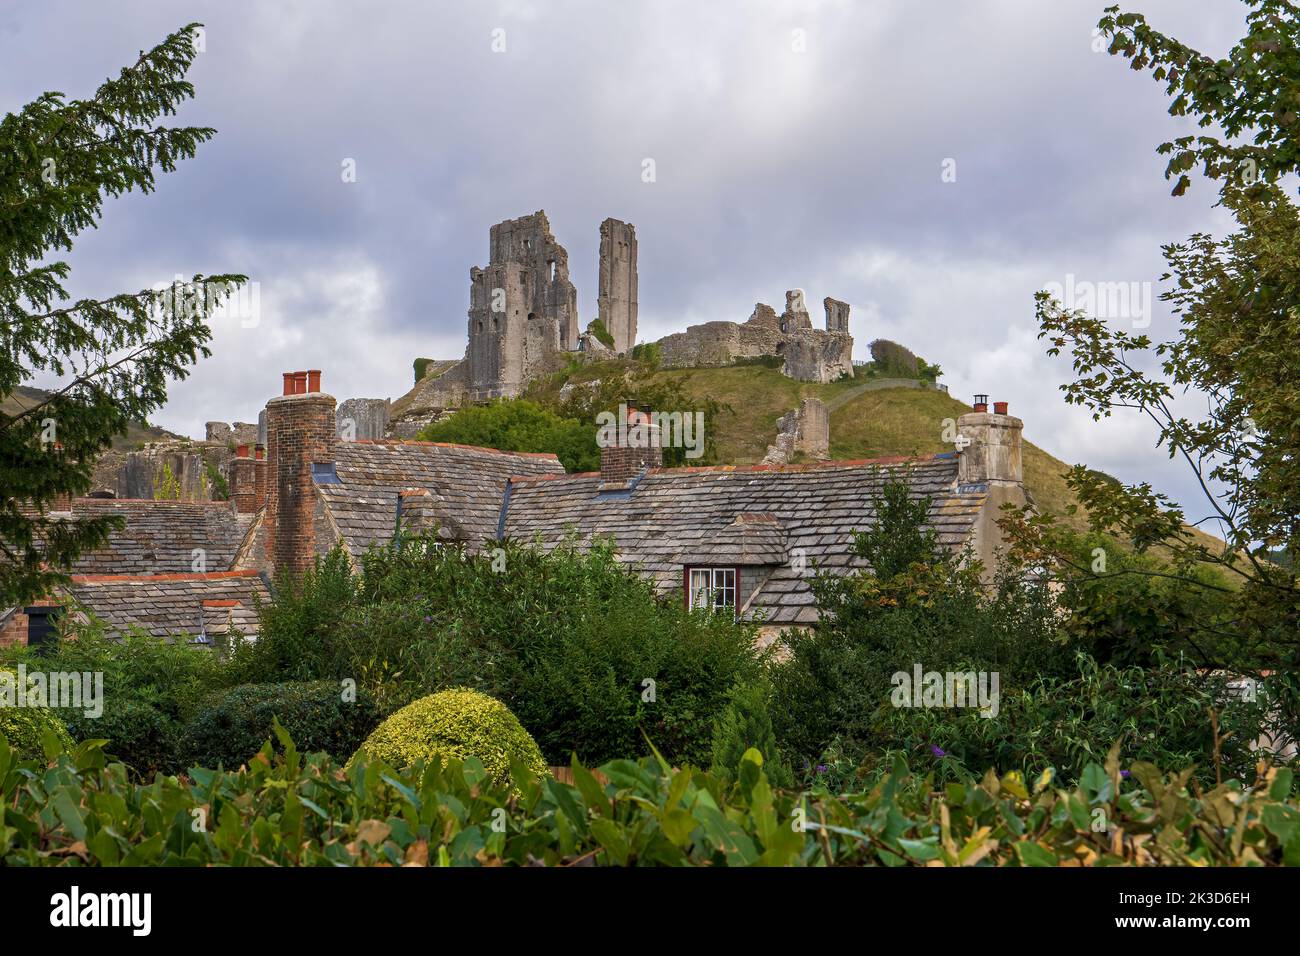 A view of Corfe Castle across the old stone roof tops in the village of Corfe, Dorset, England, Uk Stock Photo